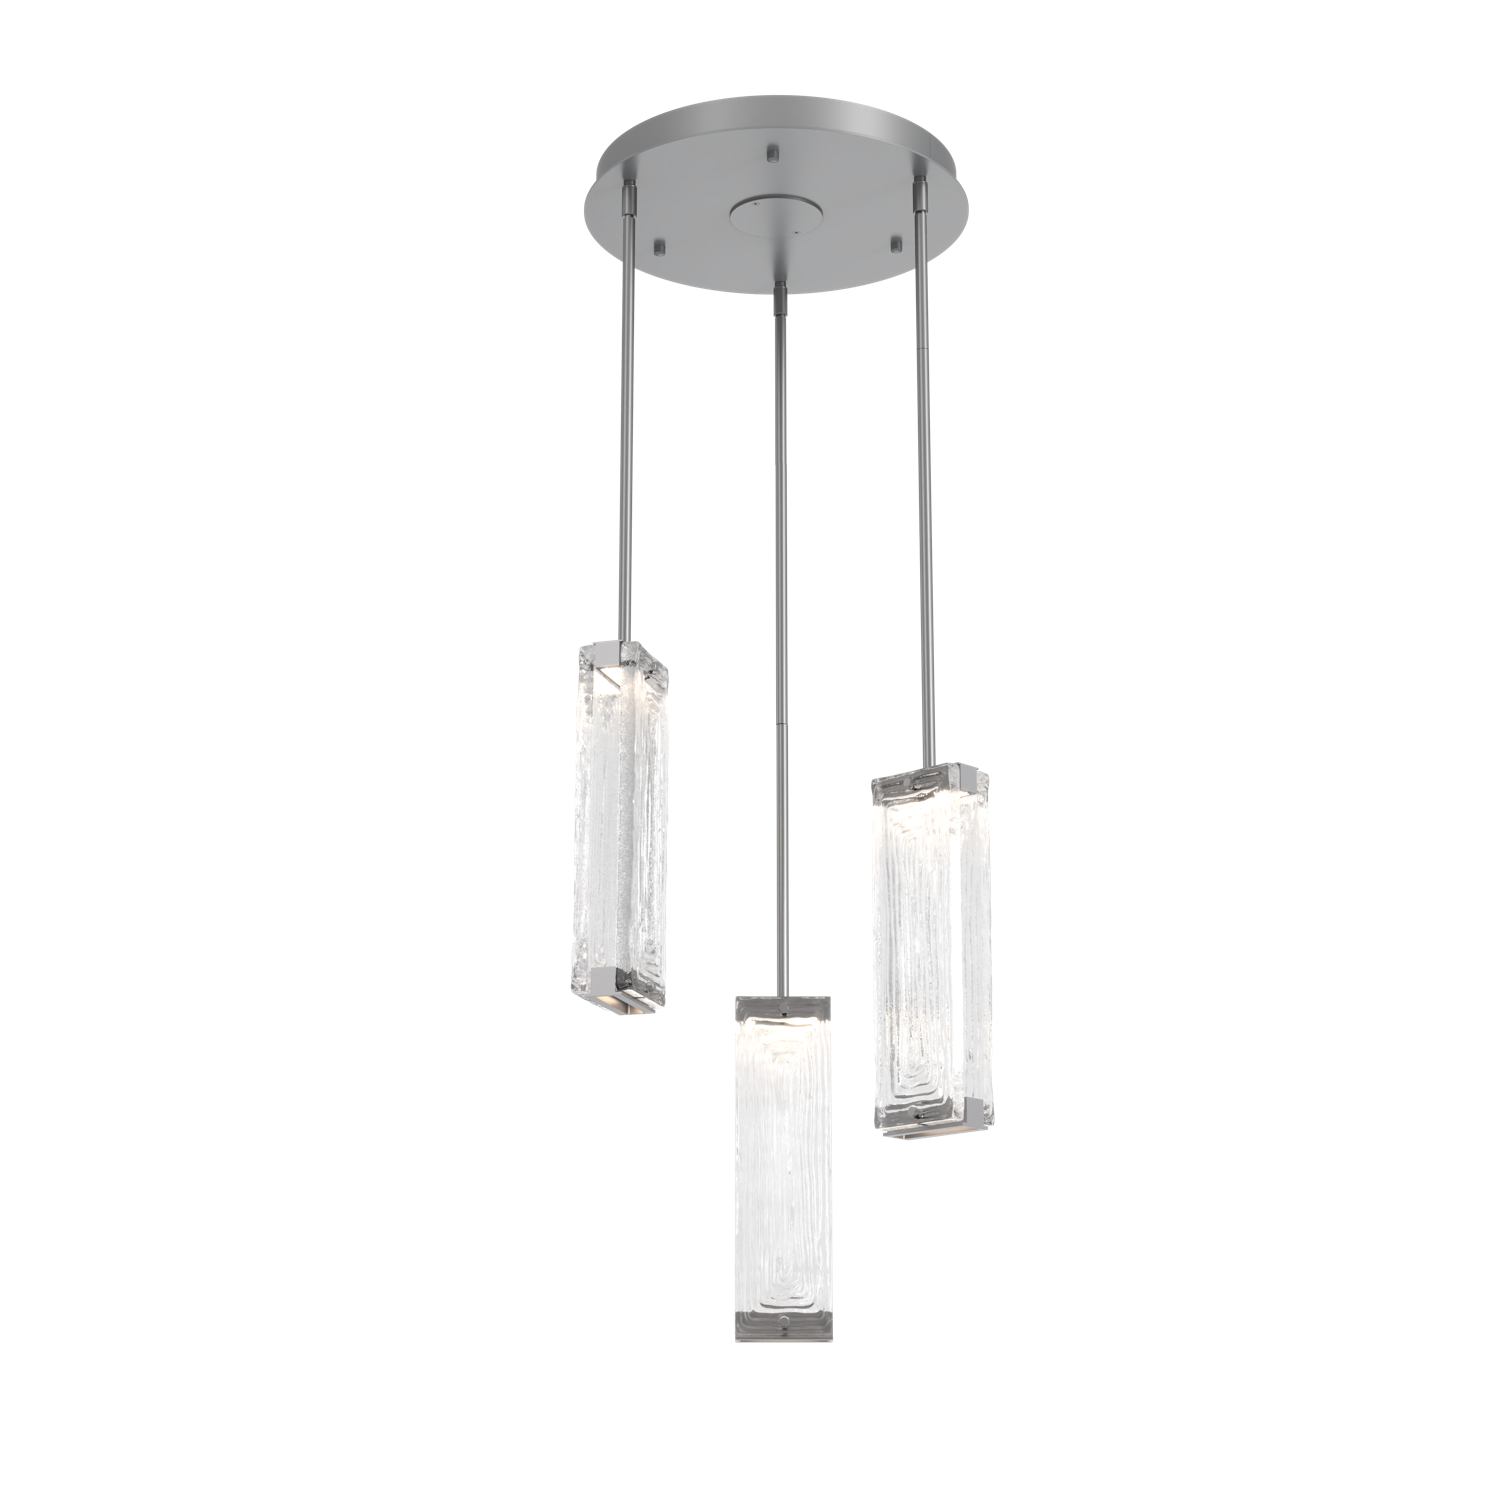 CHB0090-03-CS-TL-Hammerton-Studio-Tabulo-3-light-multi-pendant-chandelier-with-classic-silver-finish-and-clear-linea-cast-glass-shade-and-LED-lamping